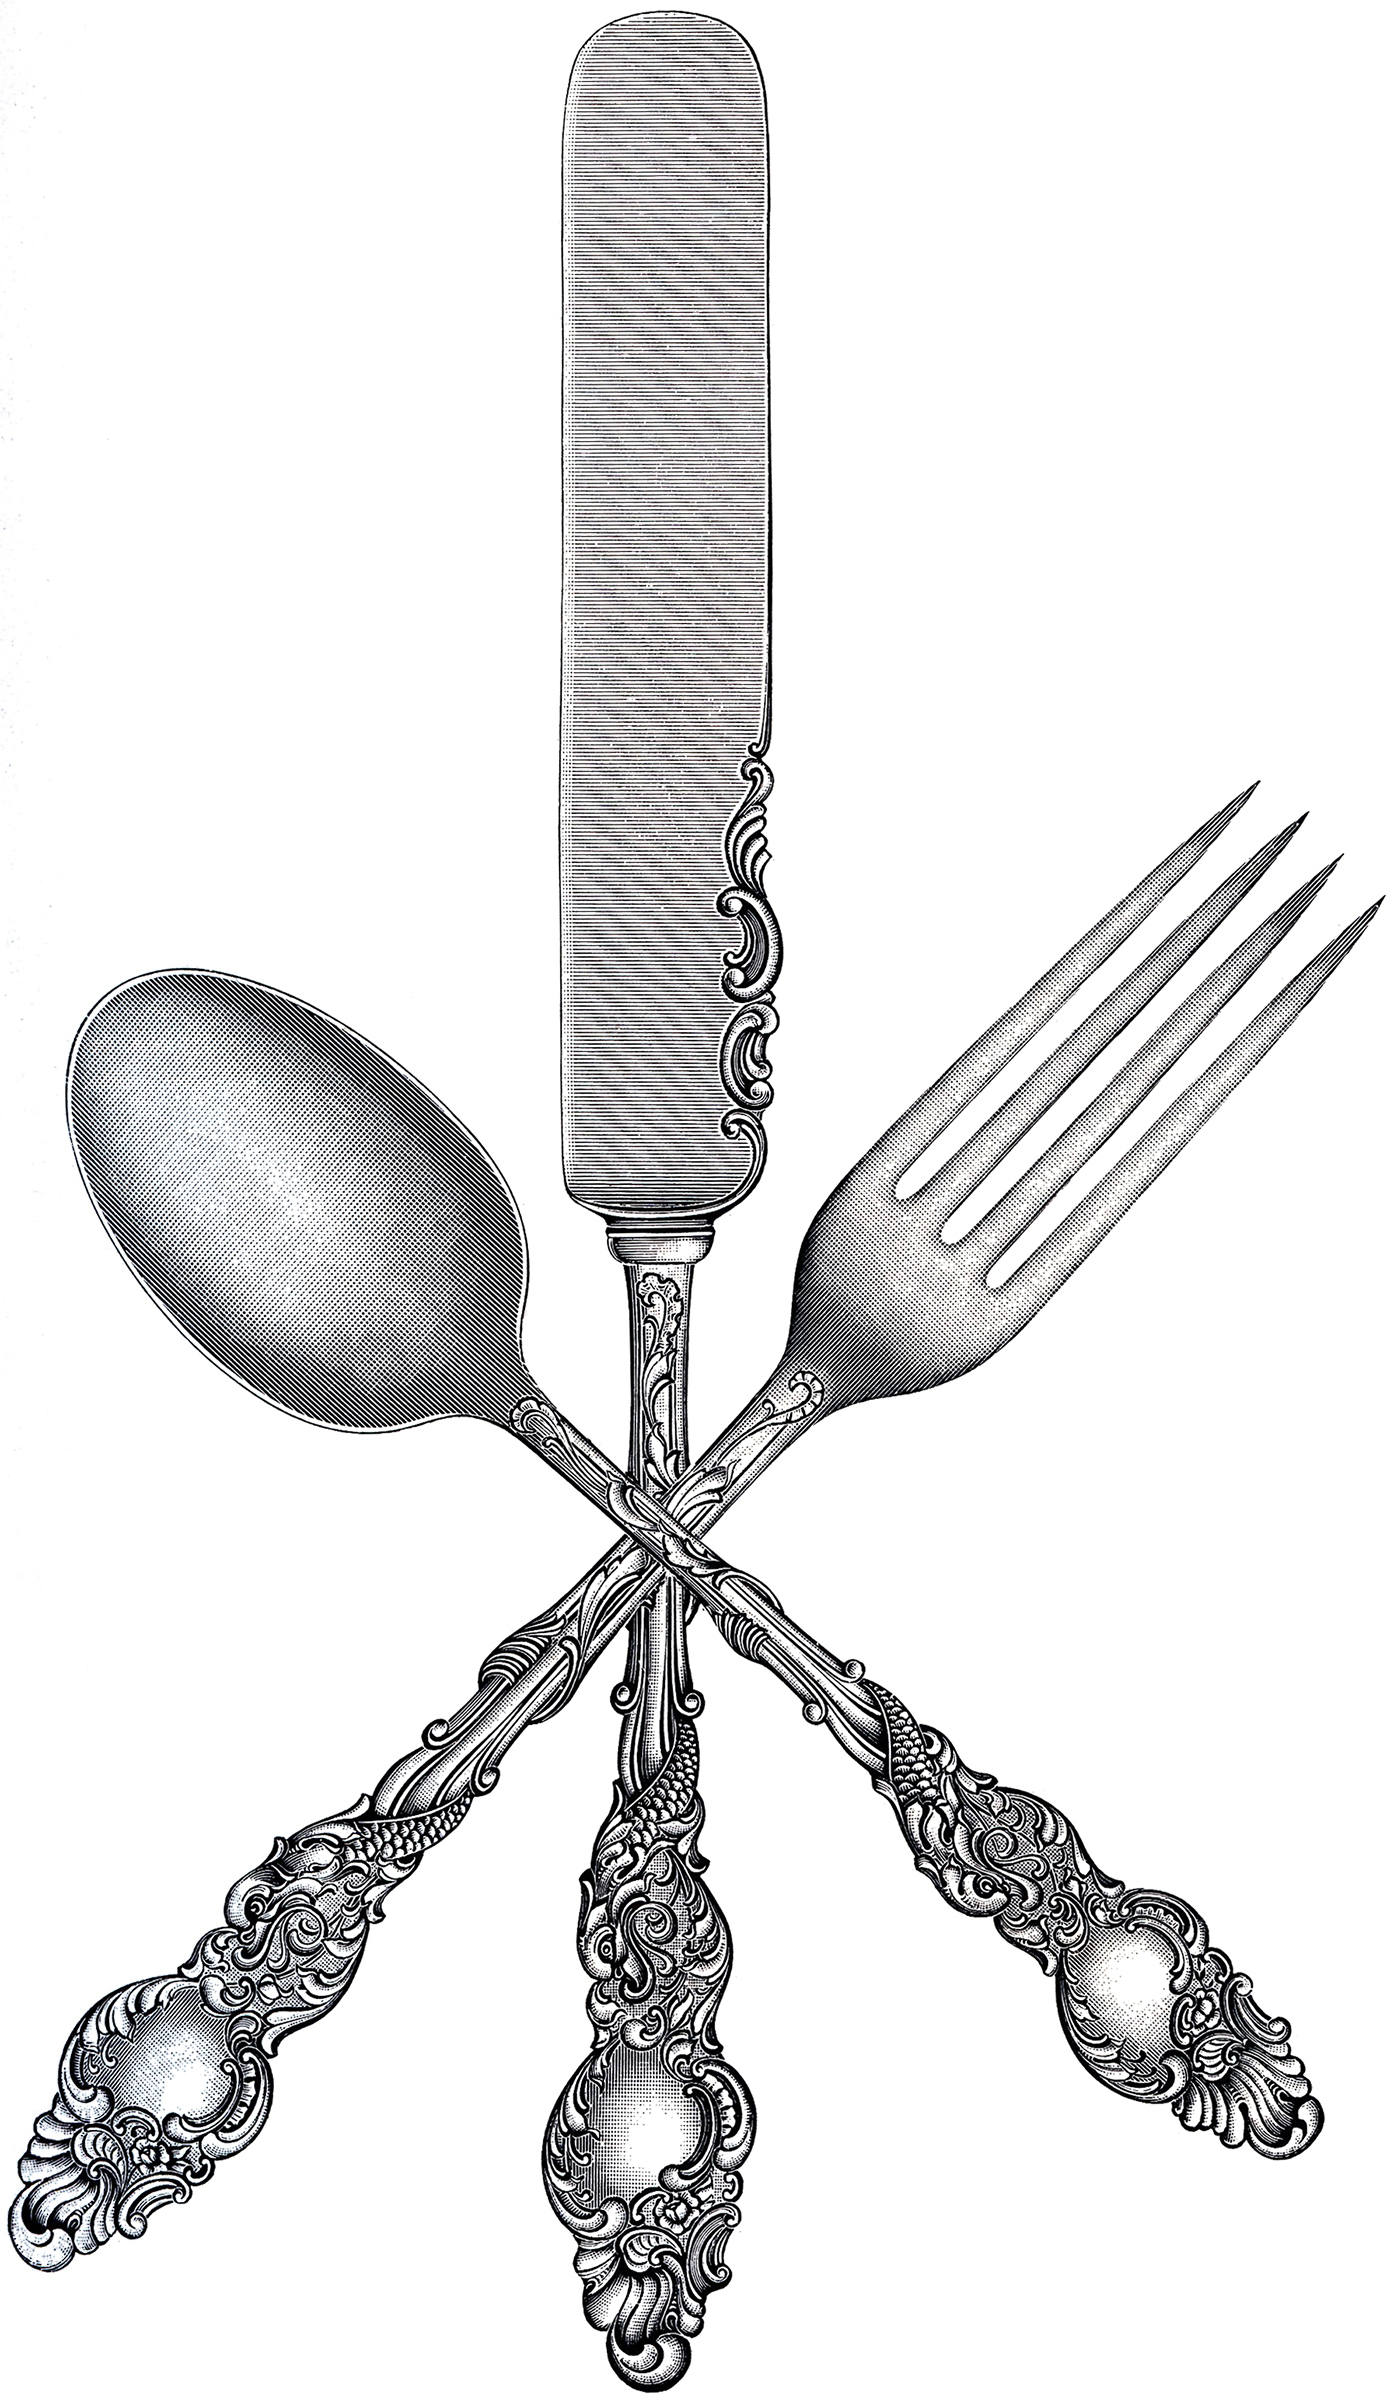 Free Fork Spoon Knife Clip Art   The Graphics Fairy